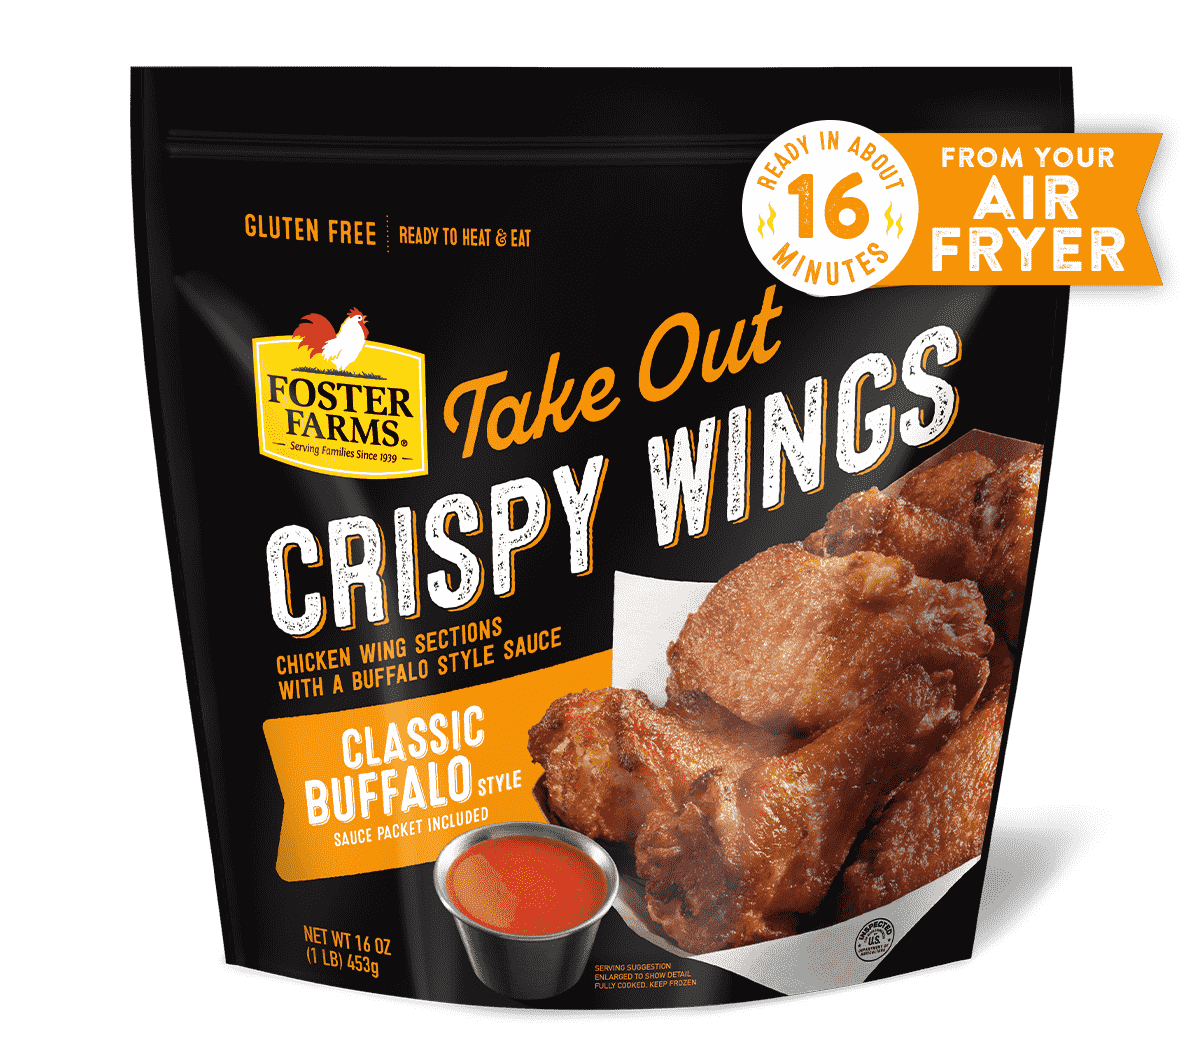 Free Range Chicken Wings - Products - Foster Farms